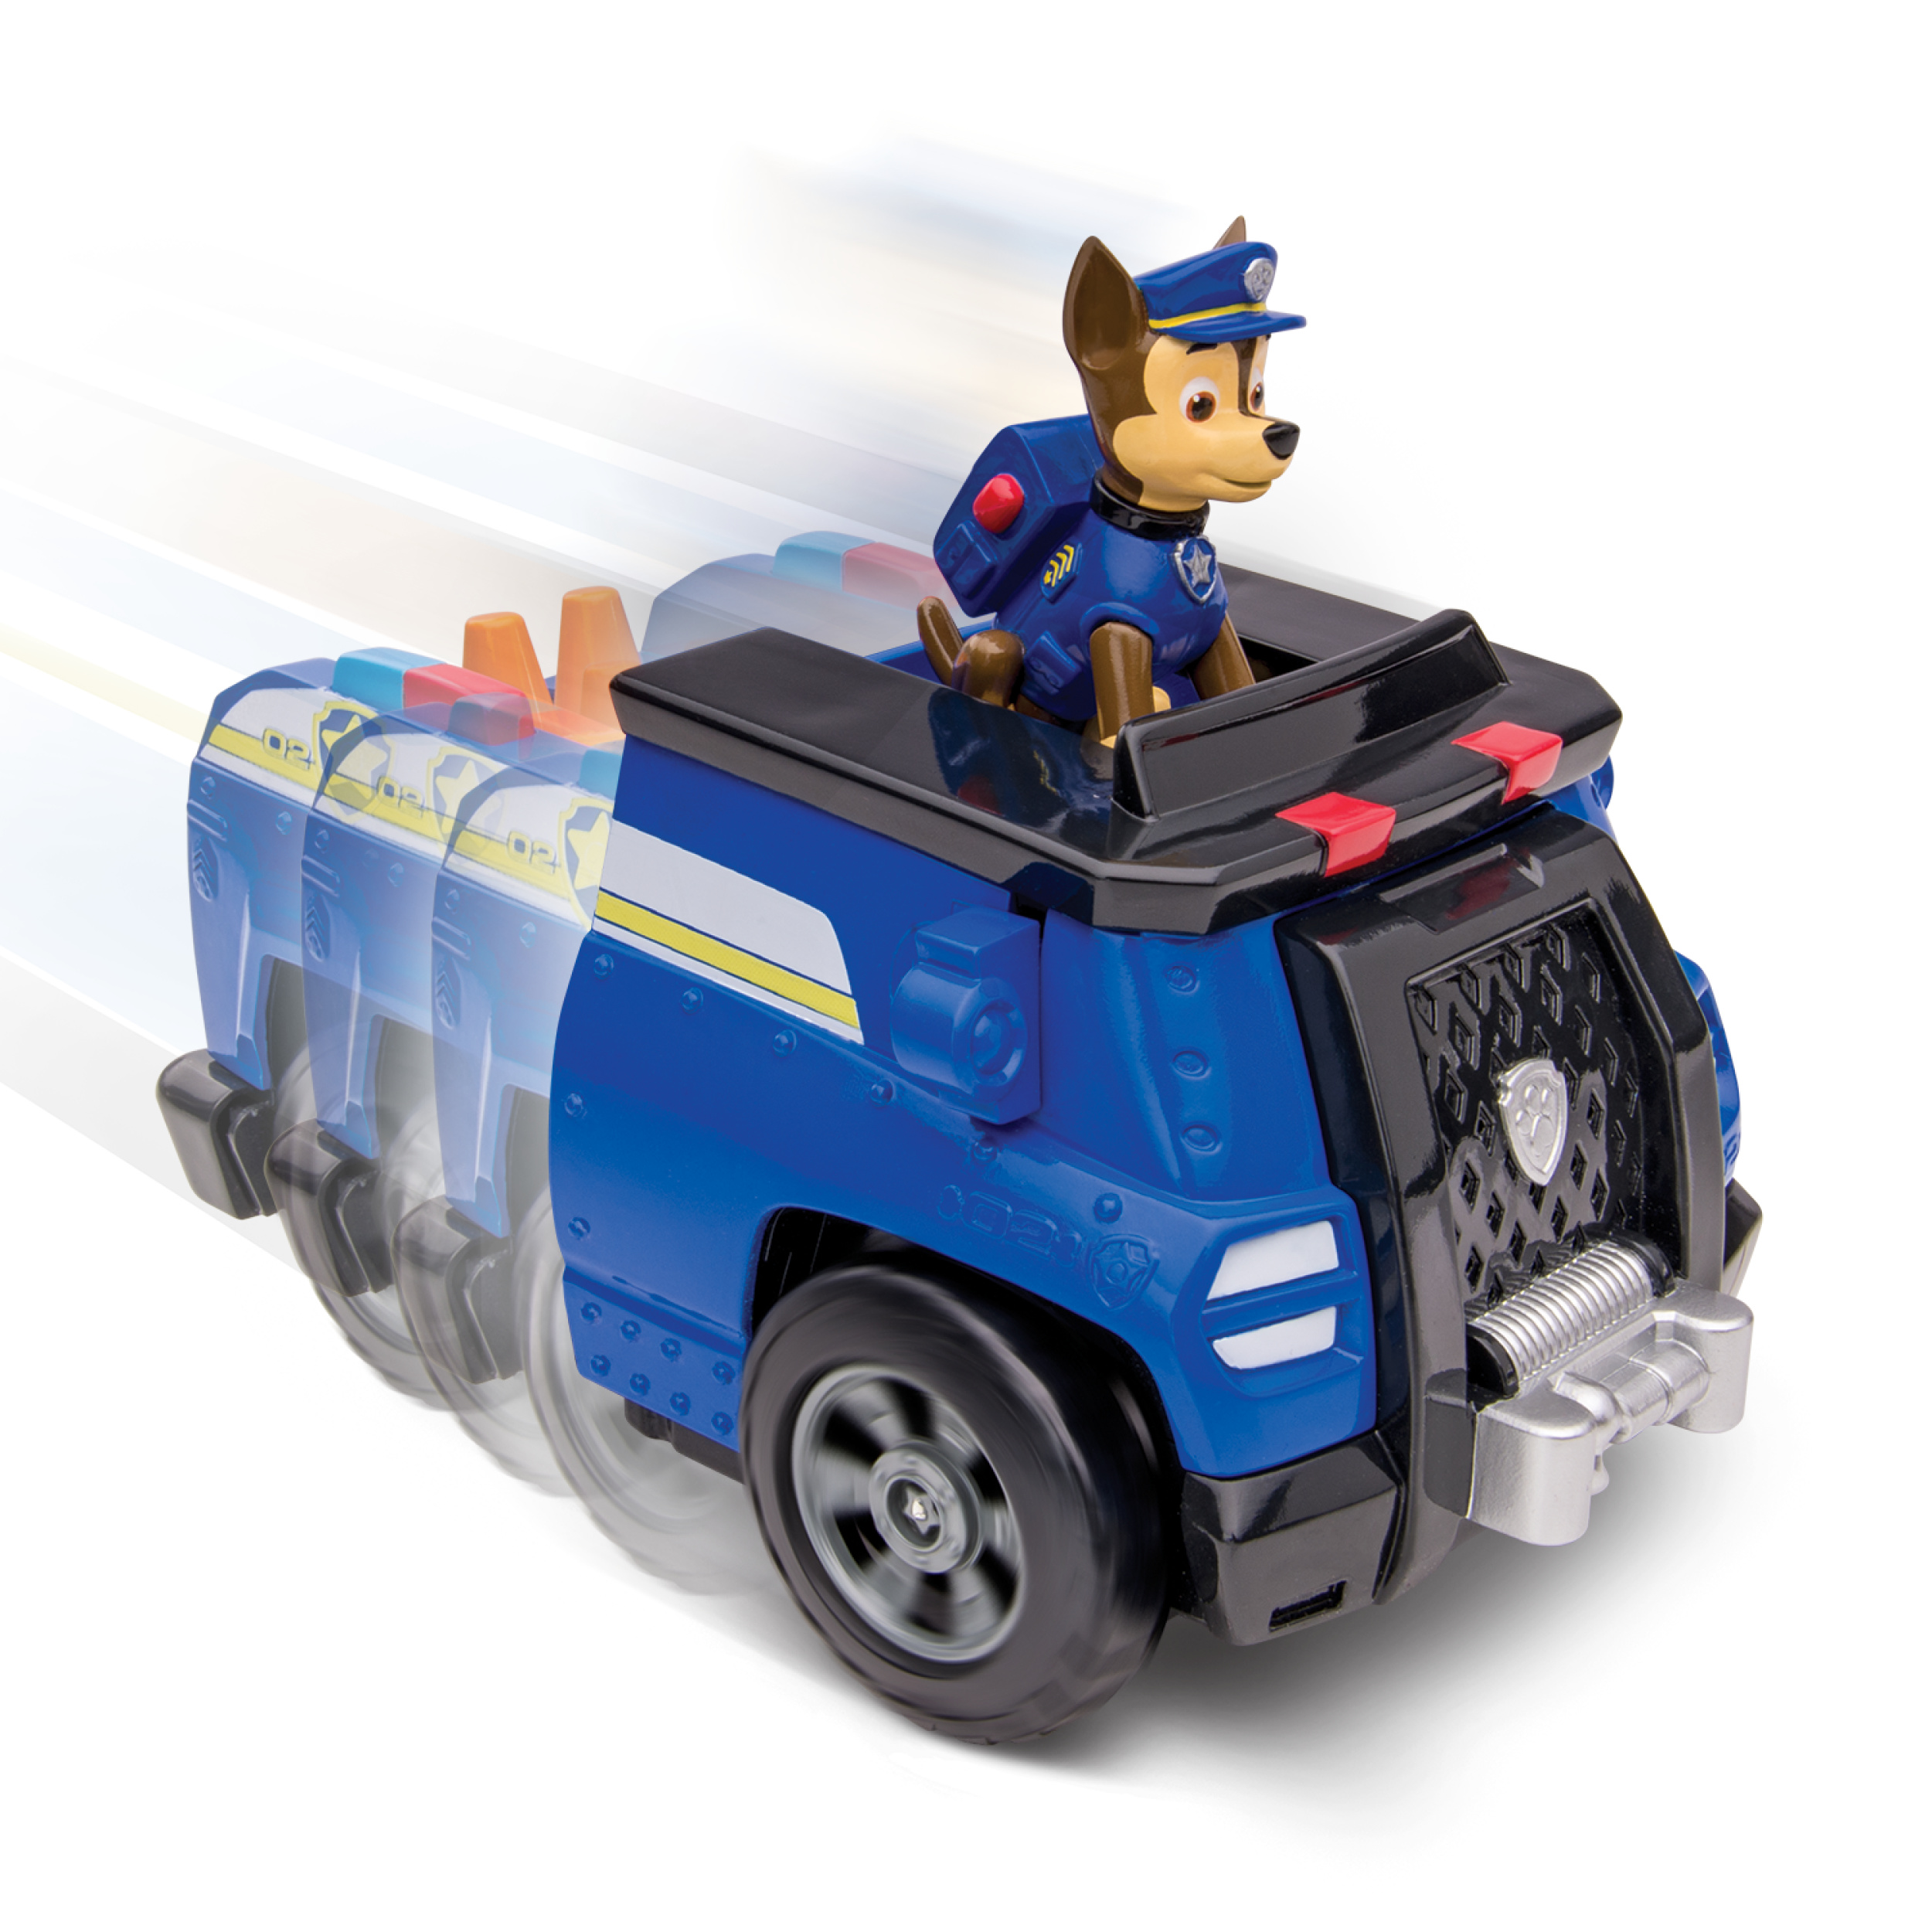 Paw Patrol On a Roll Chase, Figure and Vehicle with Sounds - image 1 of 5